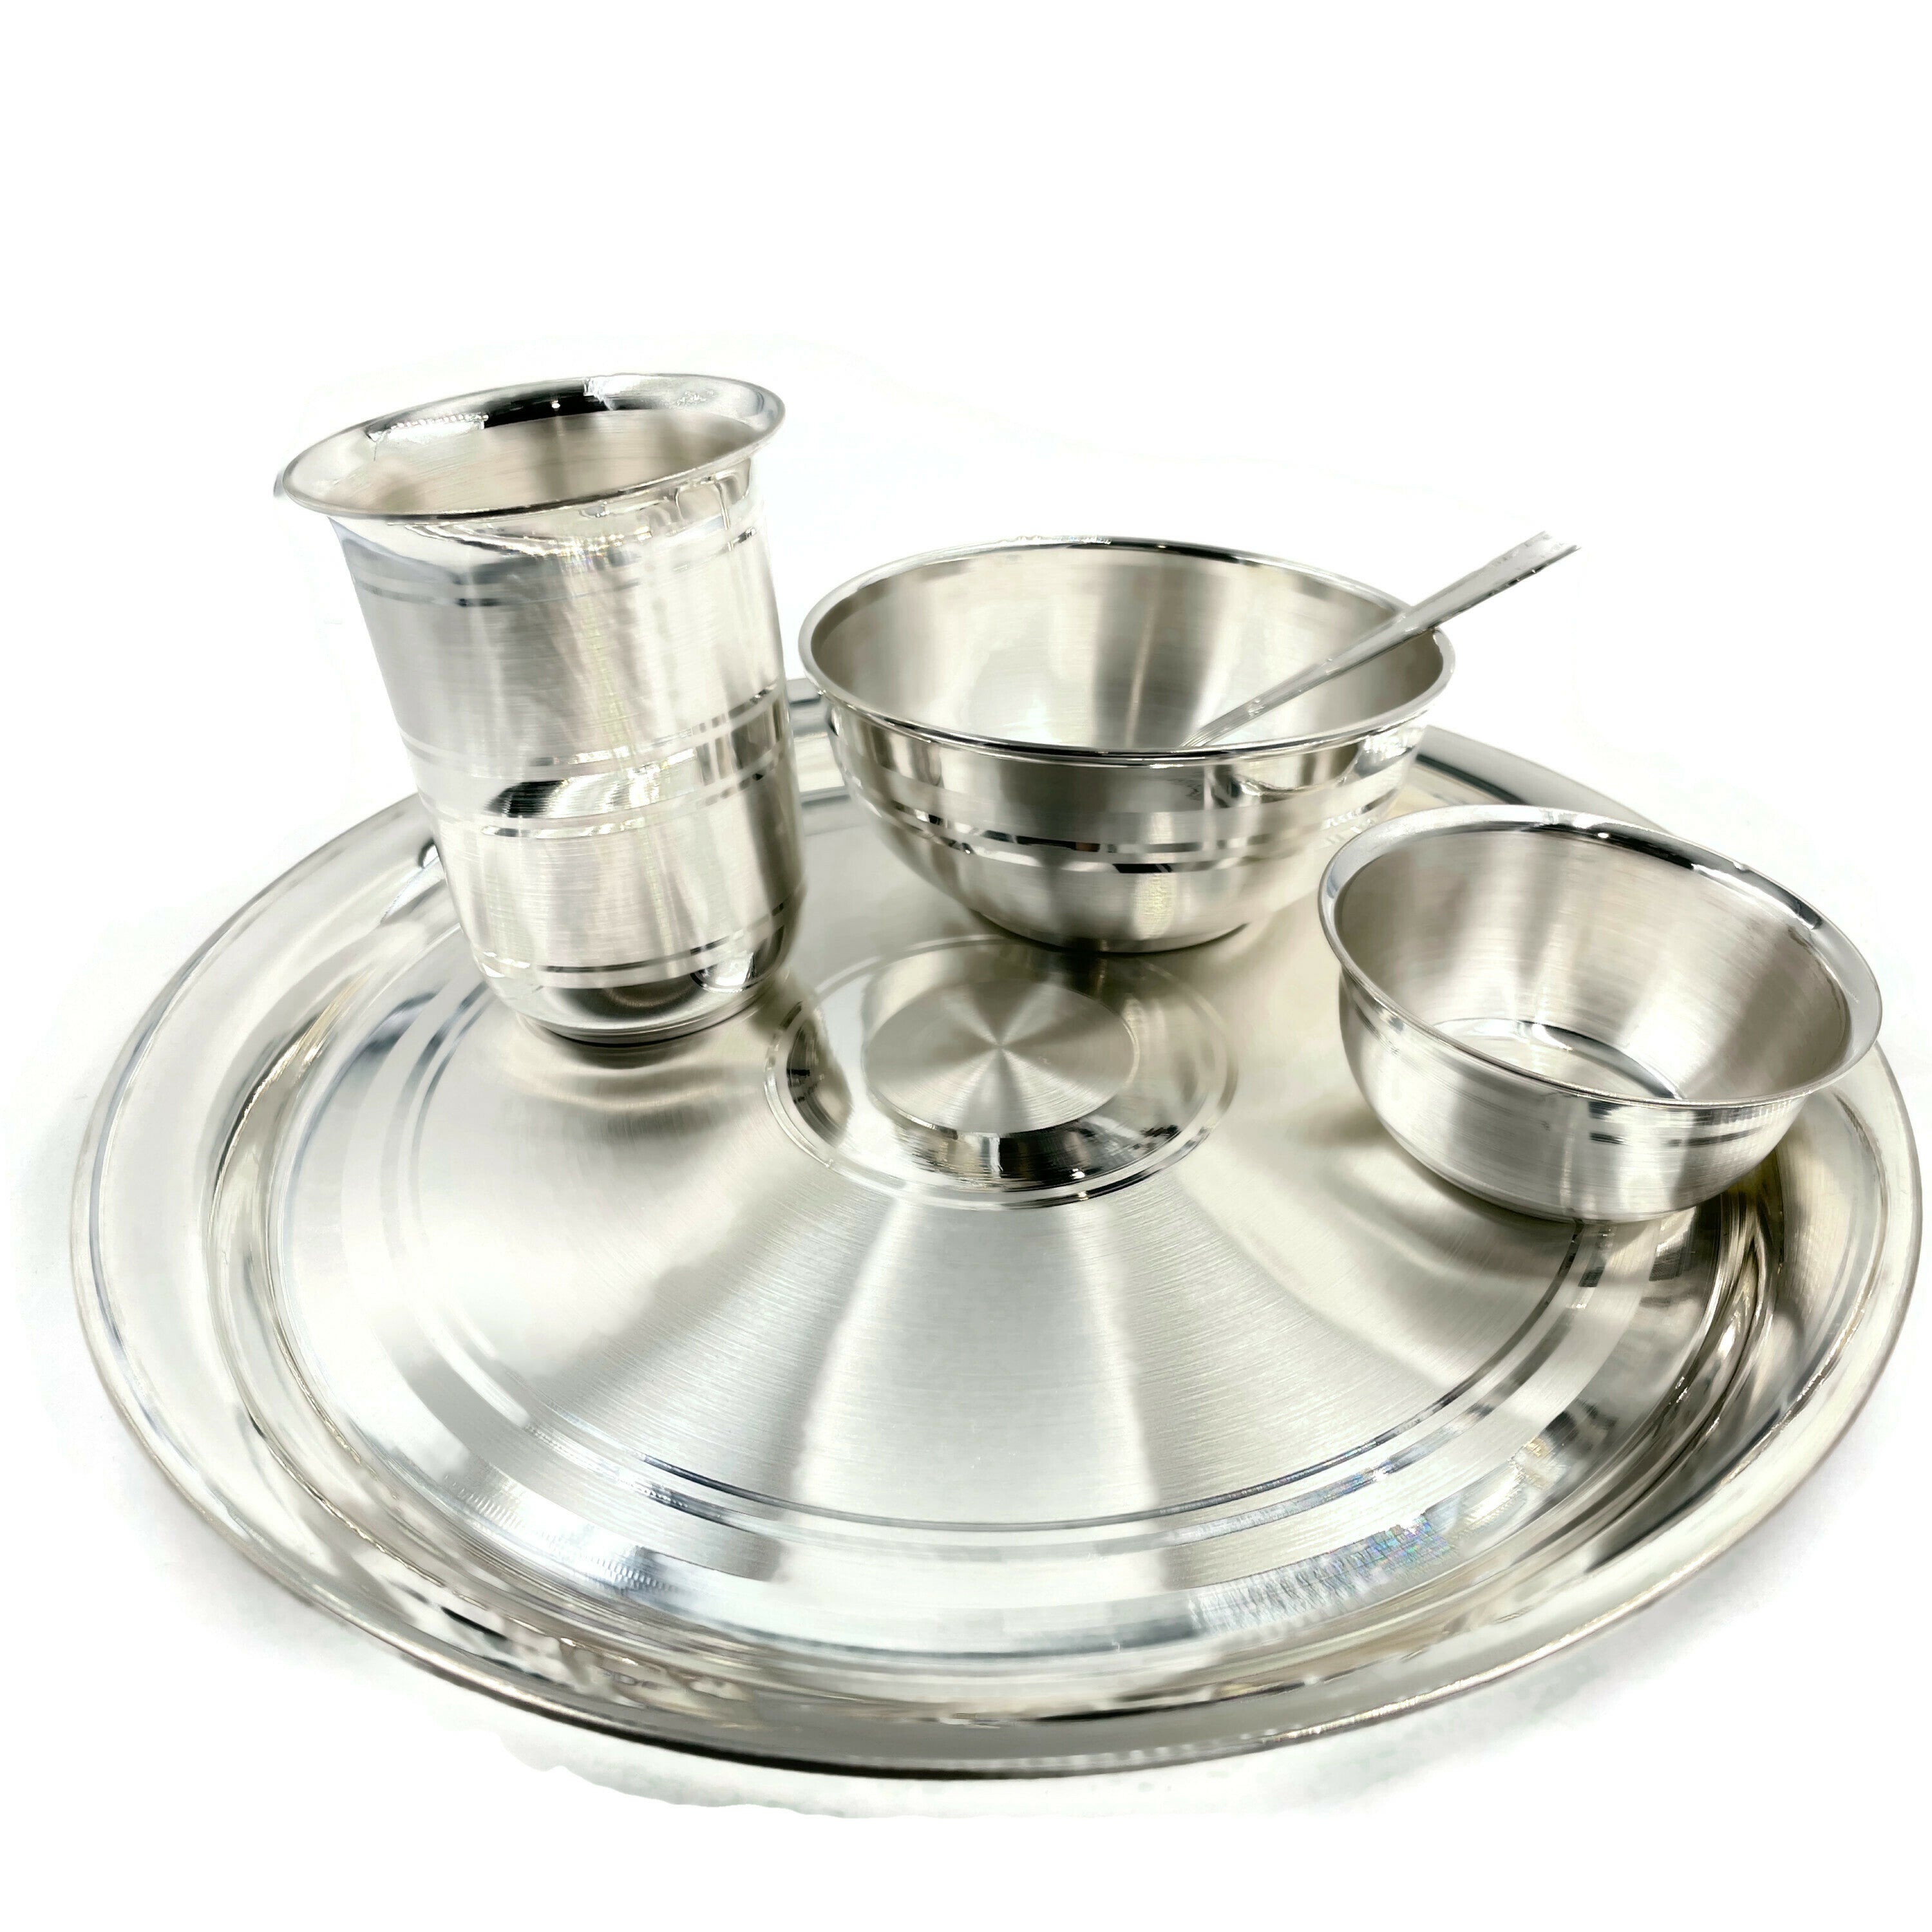 999 Pure Silver 10.0 Inch Dinner Set - Set#06